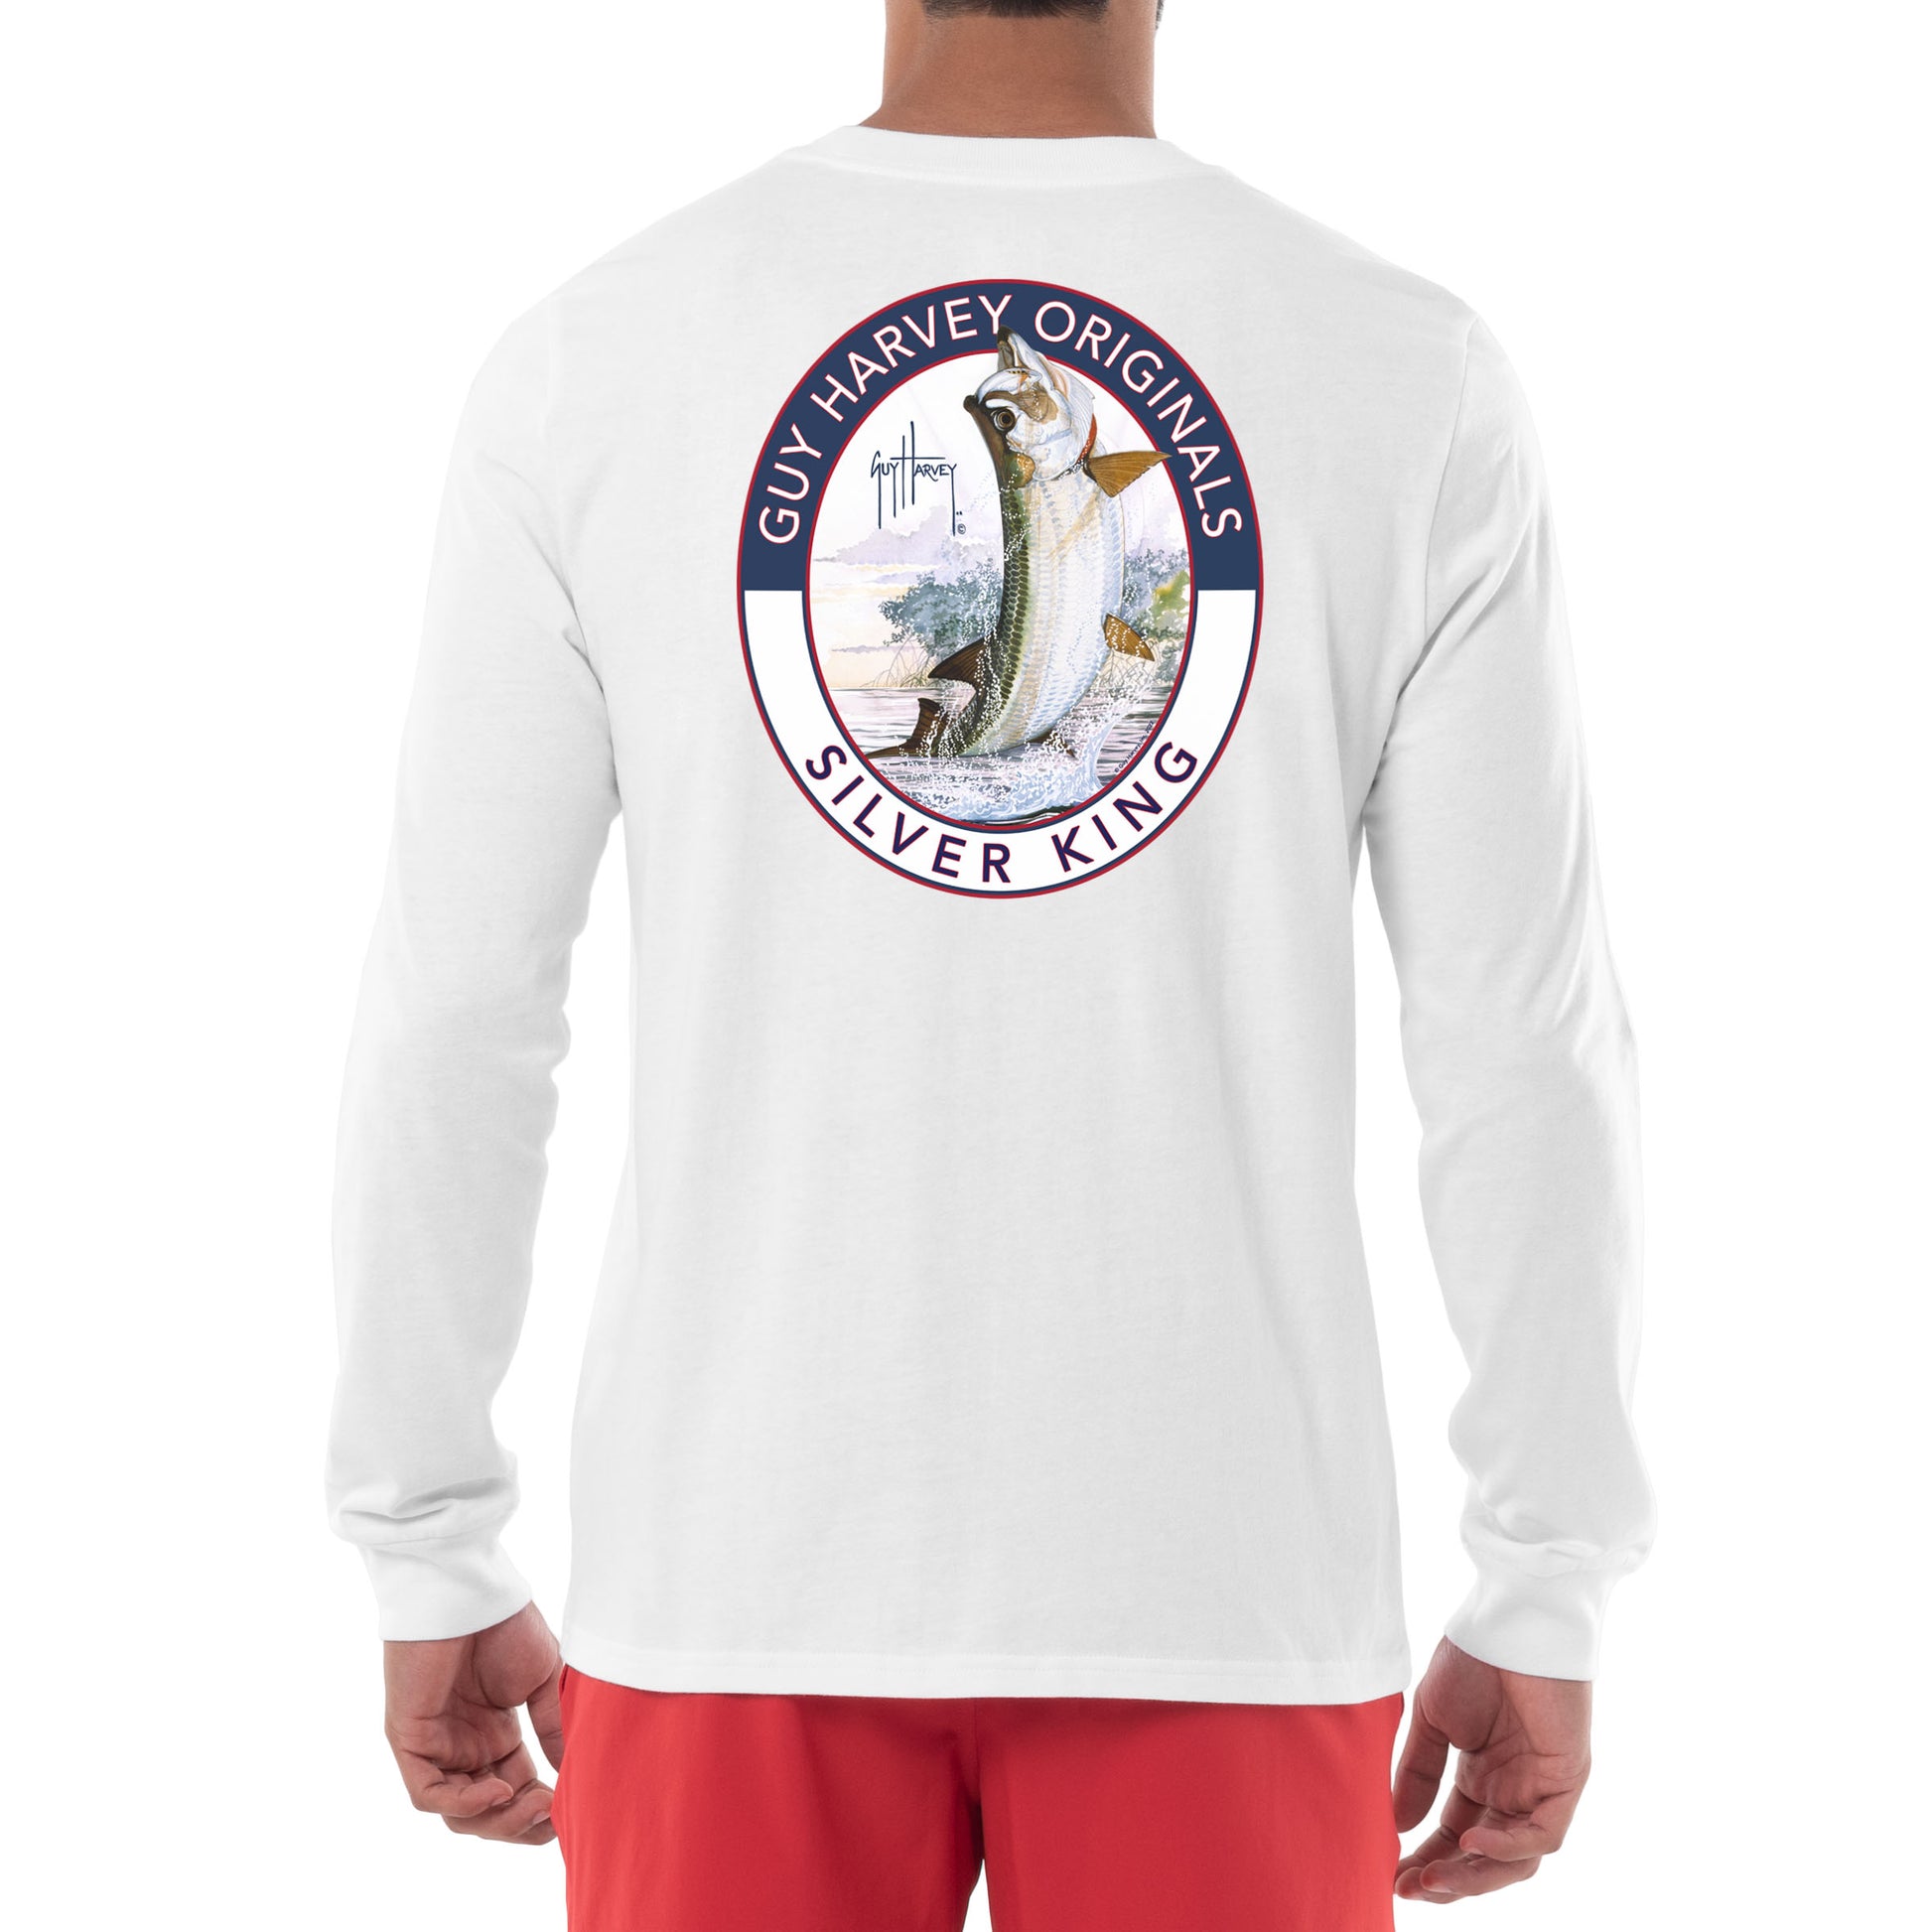 Guy Harvey Men's Offshore Fish Collection Long Sleeve T-shirt - Bright White  3x Large : Target